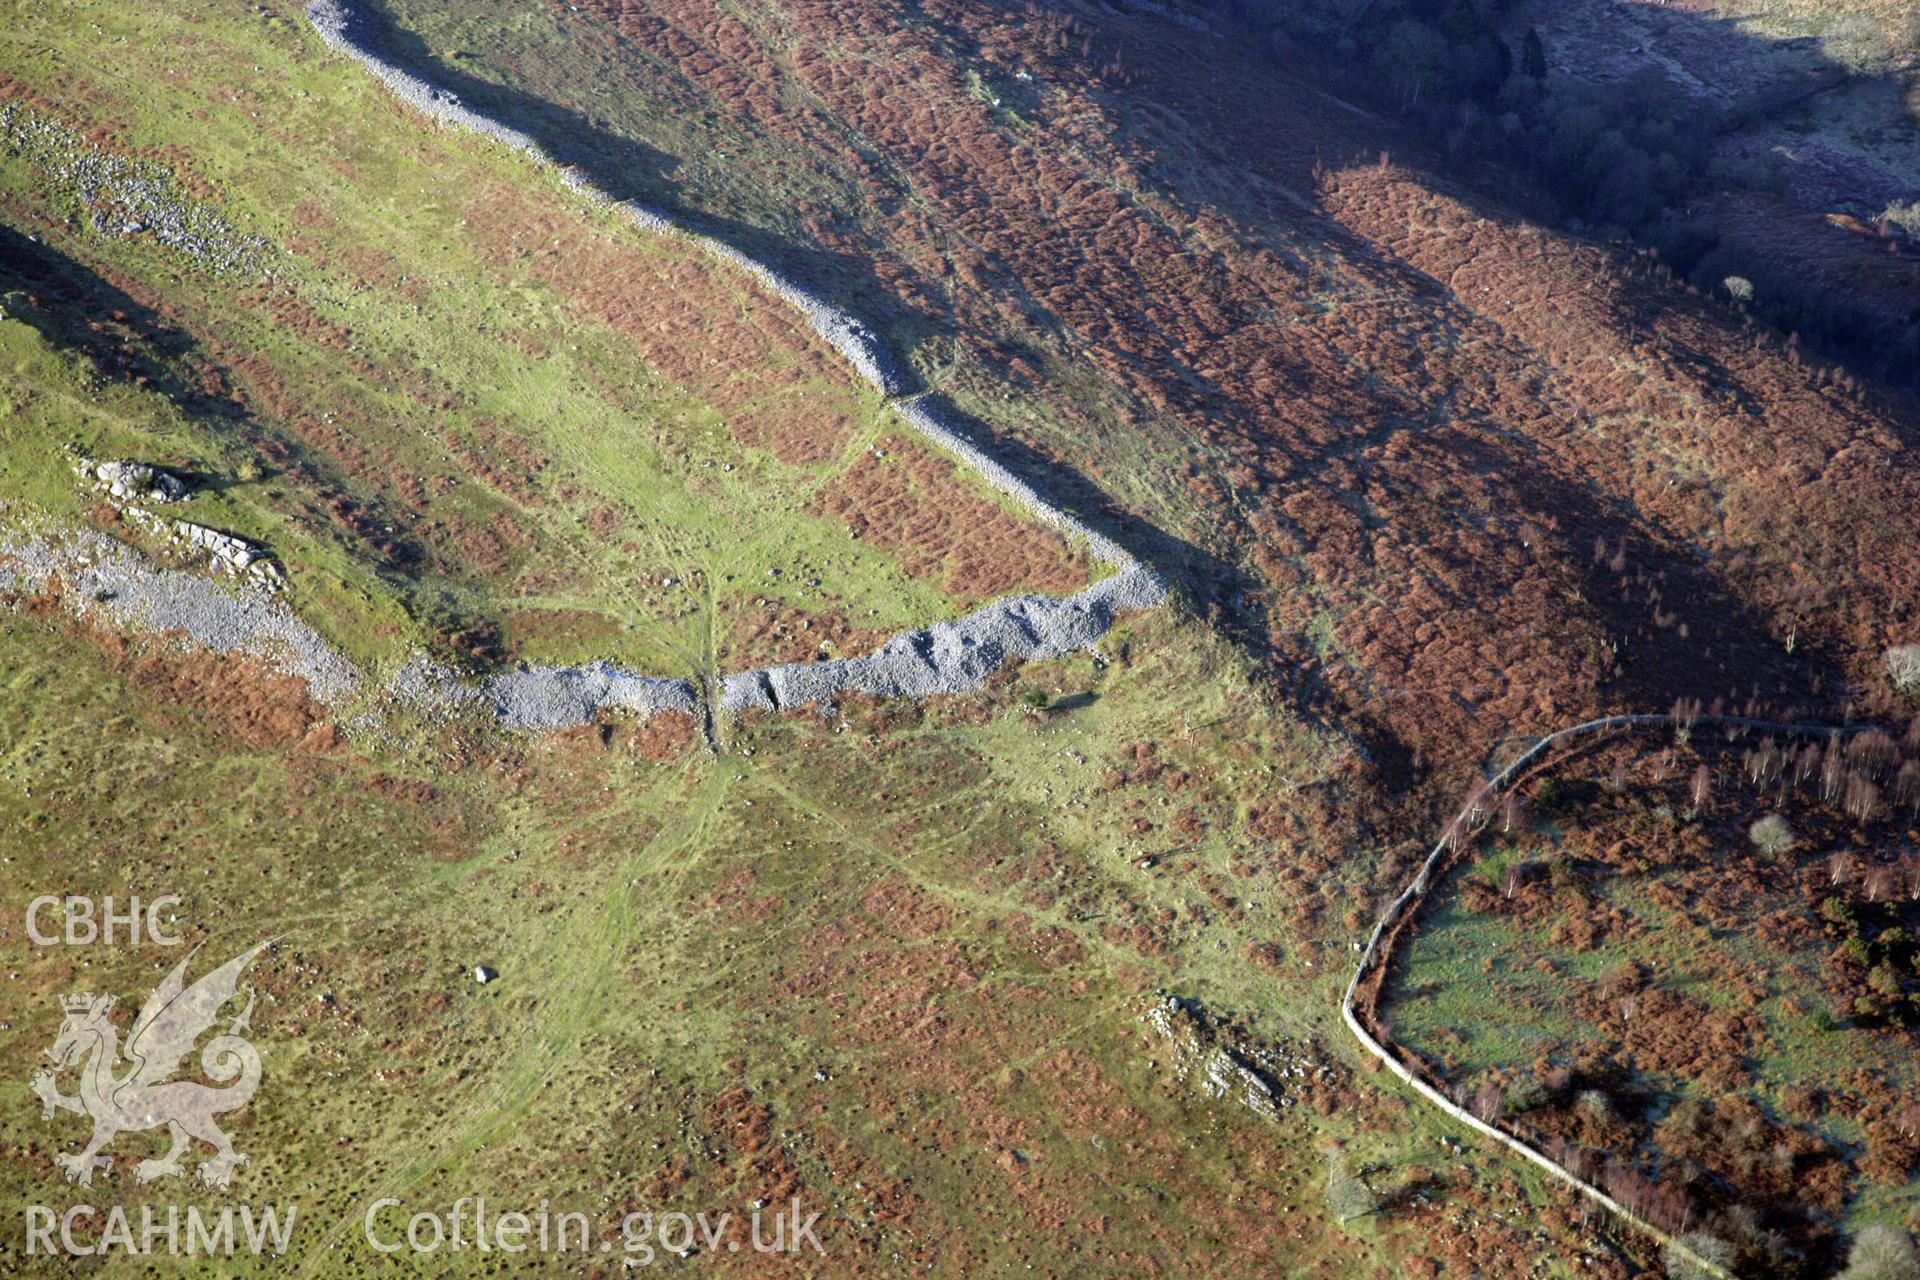 RCAHMW colour oblique photograph of Carn Goch Camps; Gaer Fawr. Taken by Toby Driver on 02/02/2012.